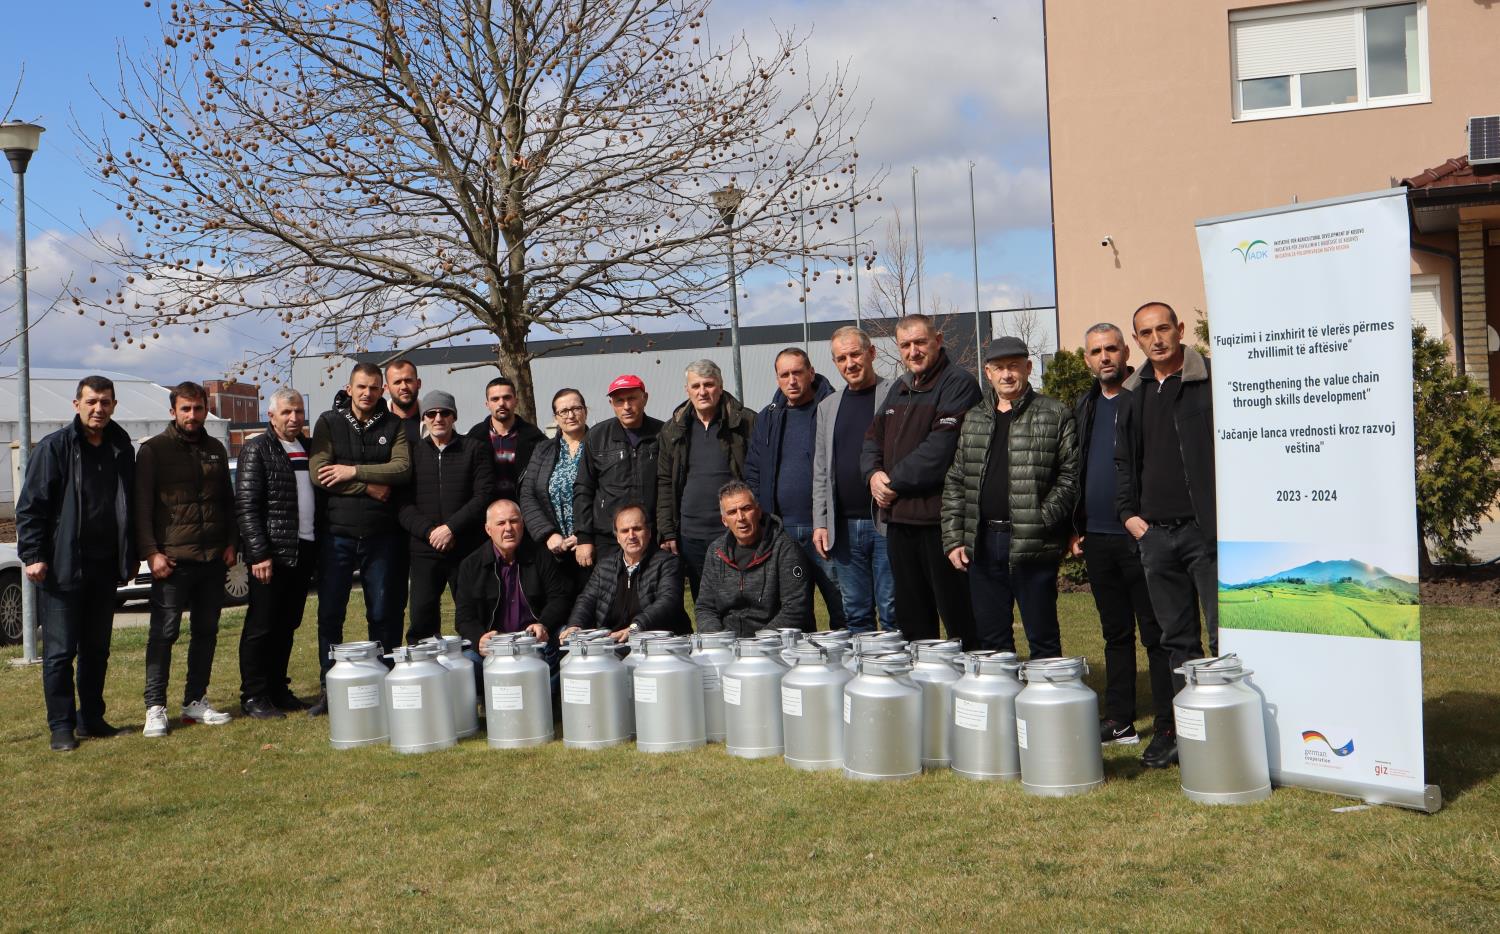 THE FARMERS OF THE MUNICIPALITIES OF VUSHTRRIS AND MALISHEVA GET SUPPORTED WITH MILK CANS